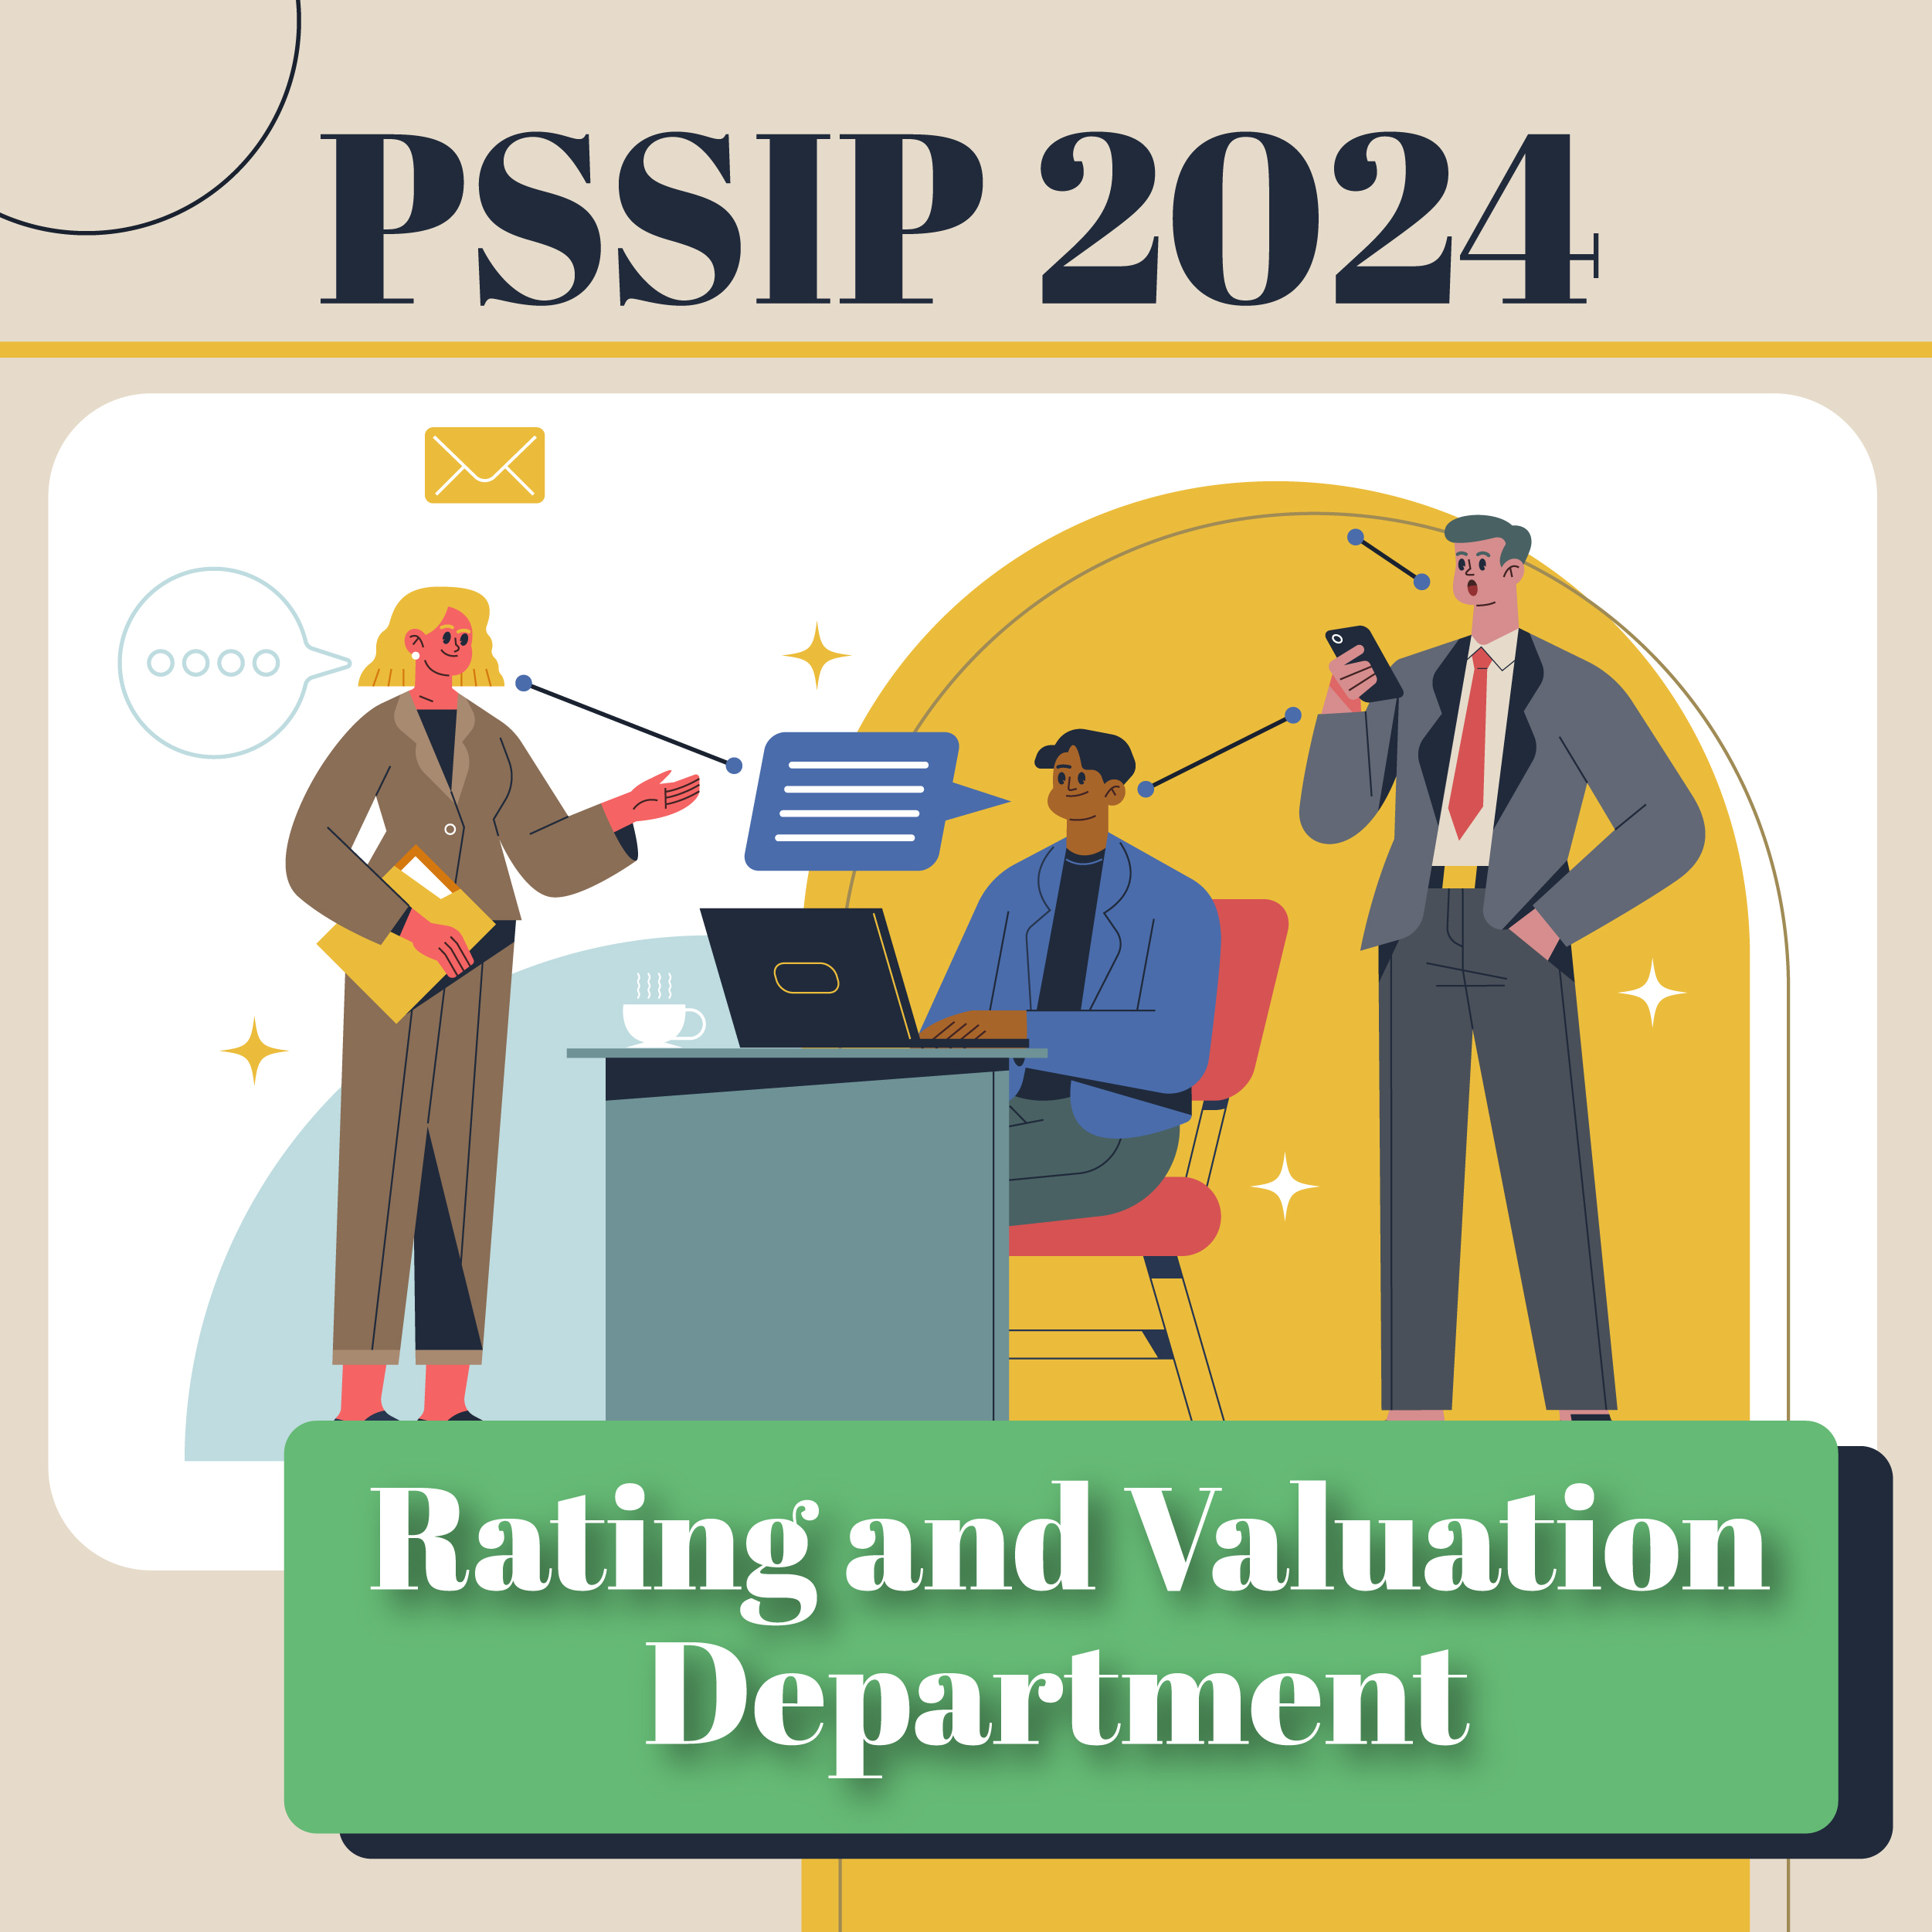 PSSIP2024 – Rating and Valuation Department